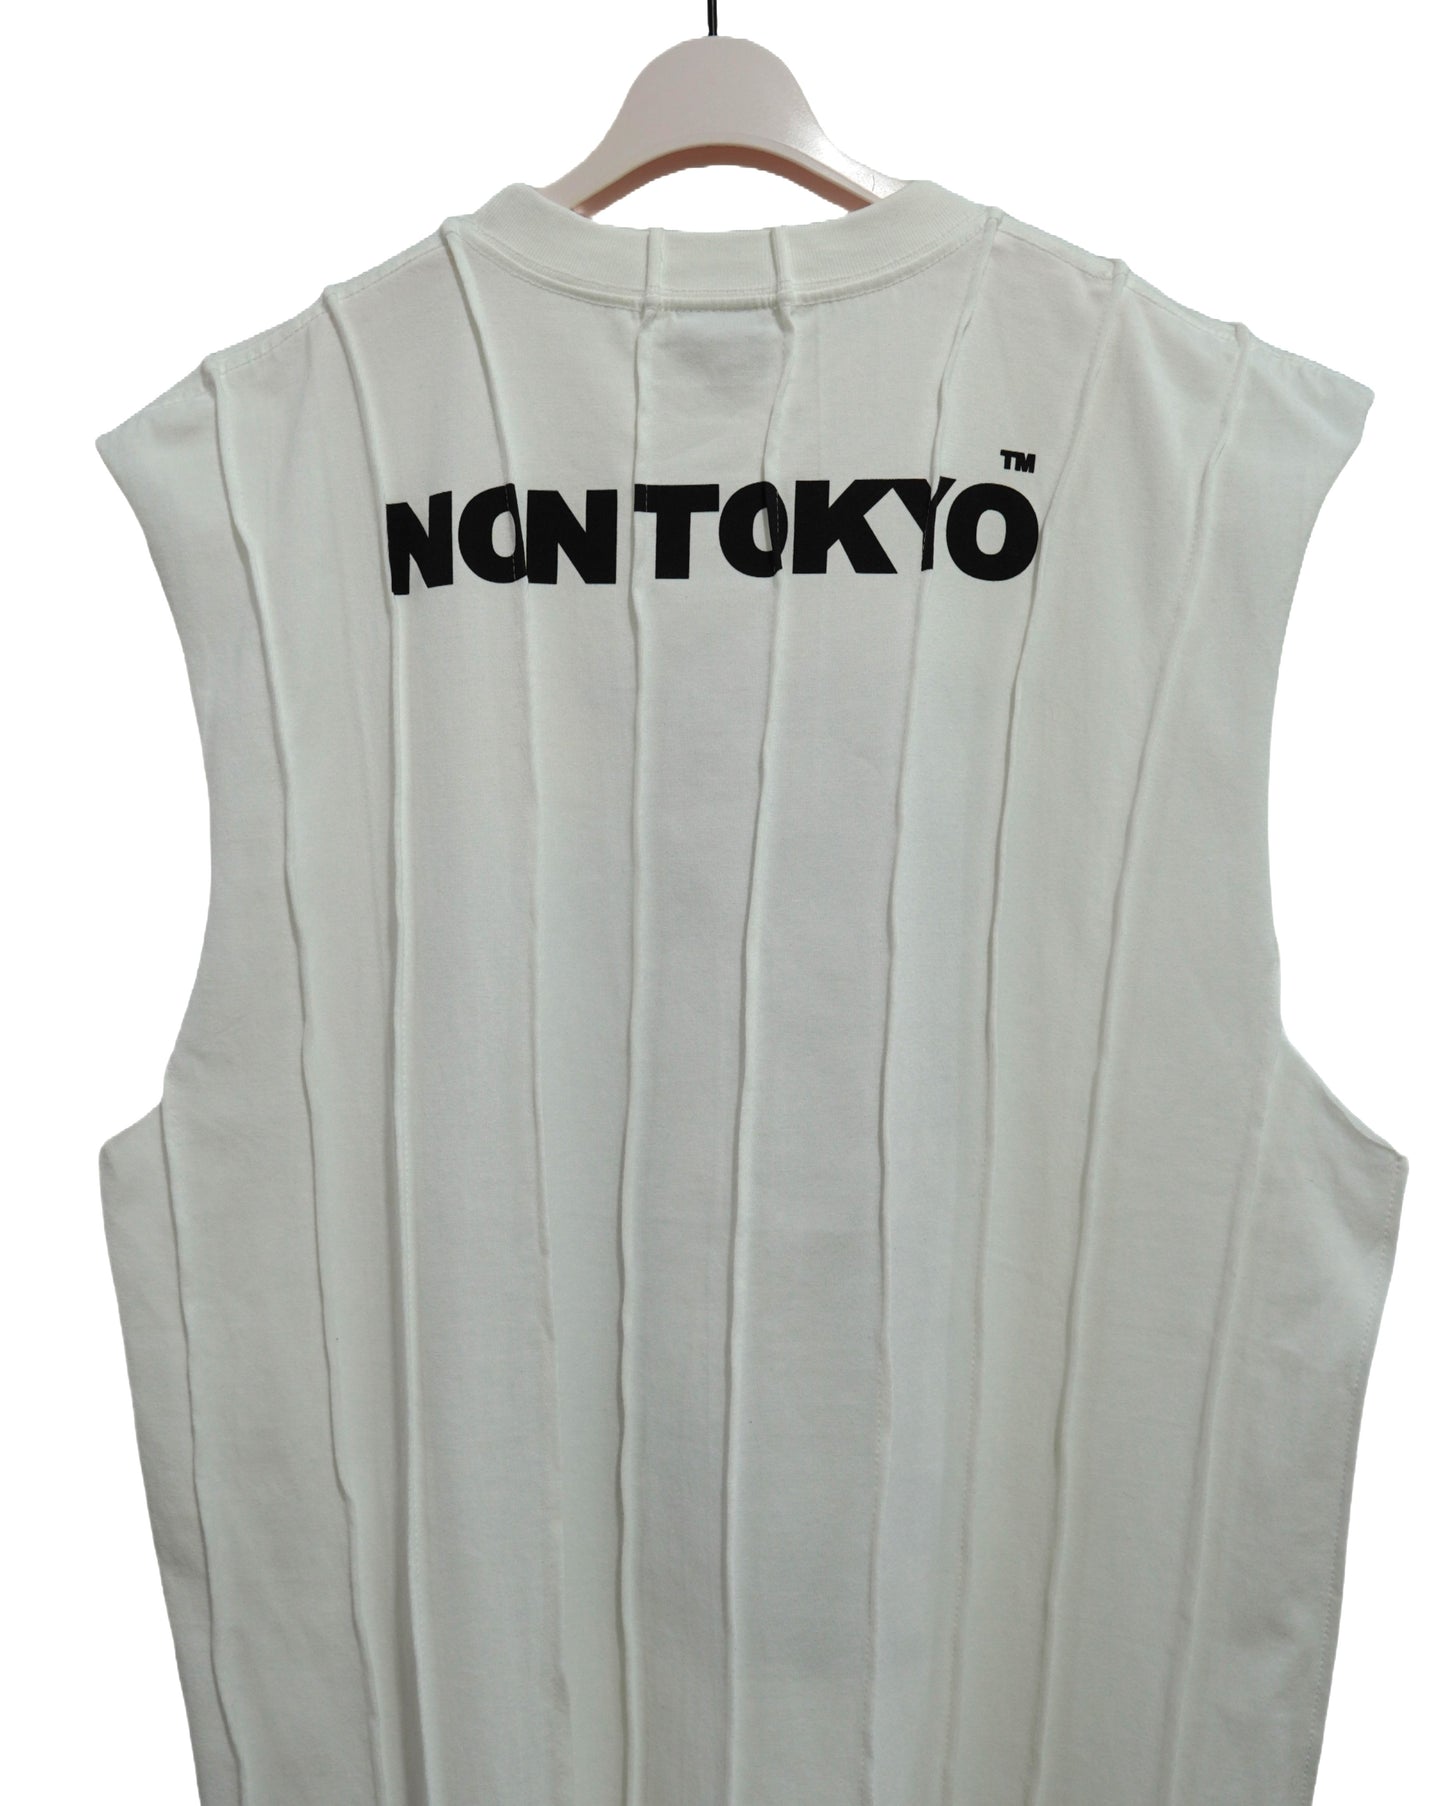 NON TOKYO /  PIN TUCK C/S (SIGNBOARD / WHITE) / 〈ノントーキョー〉ピンタックカットソー (看板 / ホワイト)